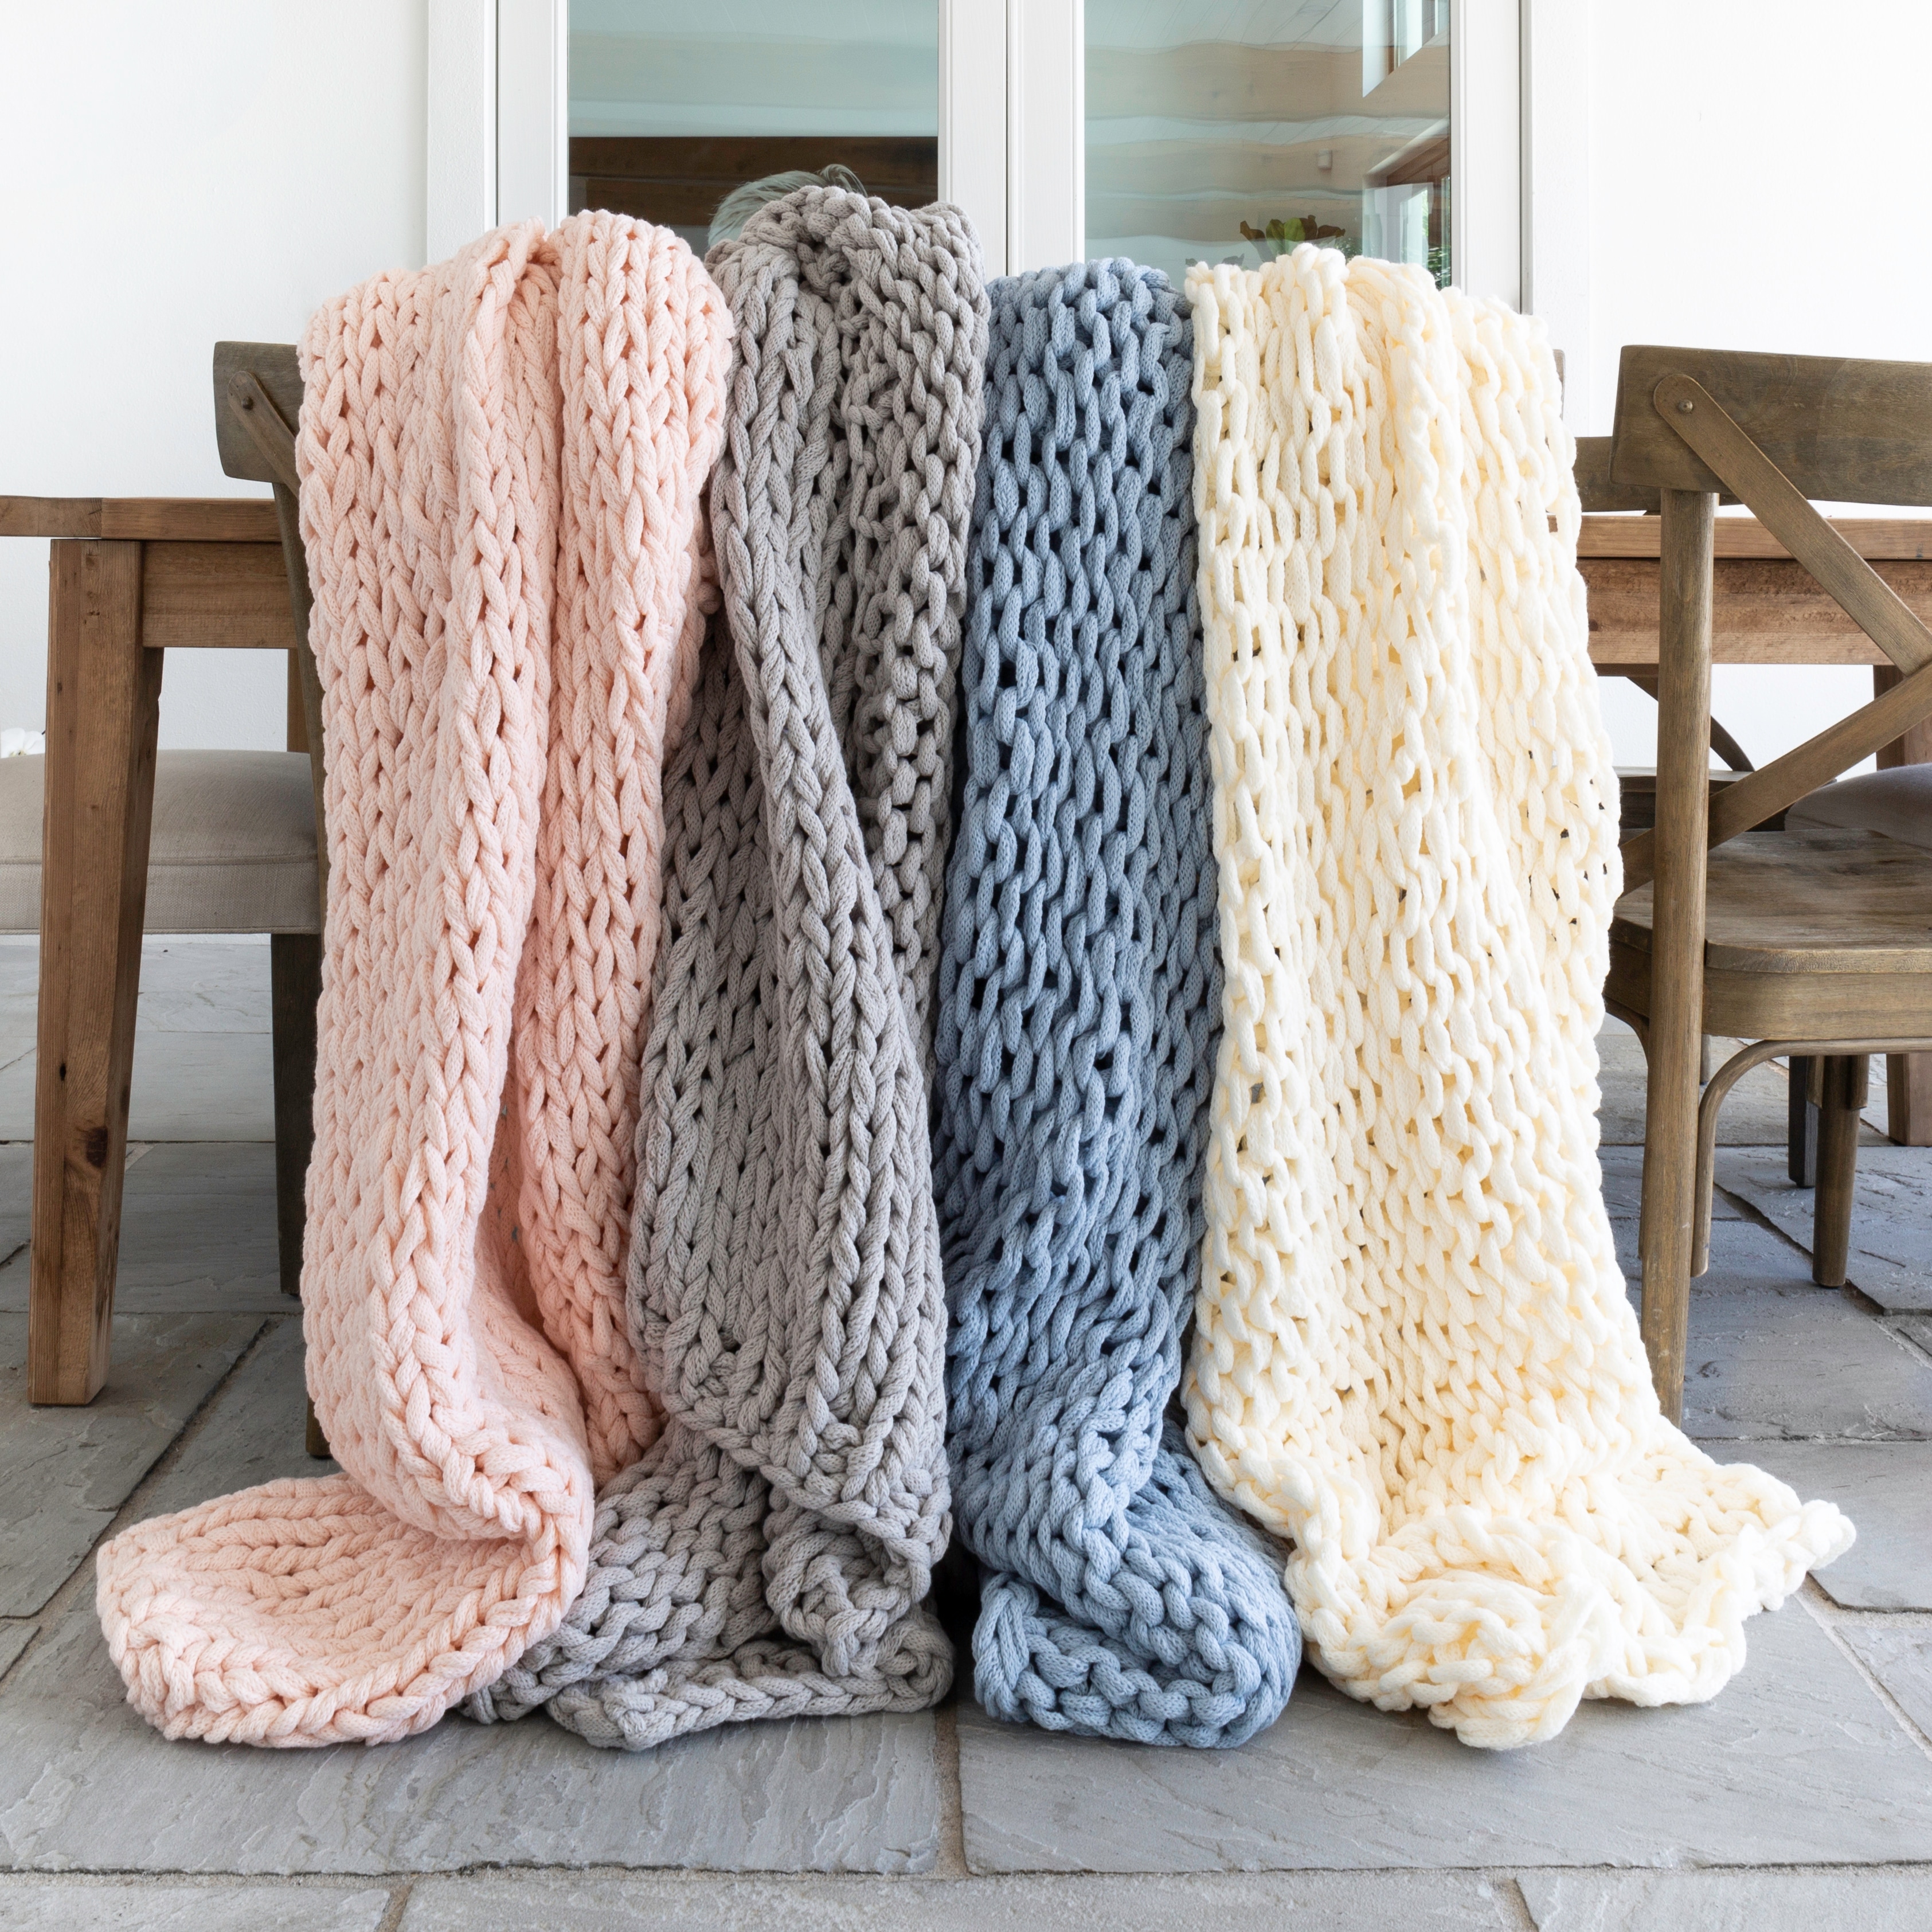 Blankets and Throws | Shop our Best Blankets Deals Online at Bed Bath ...